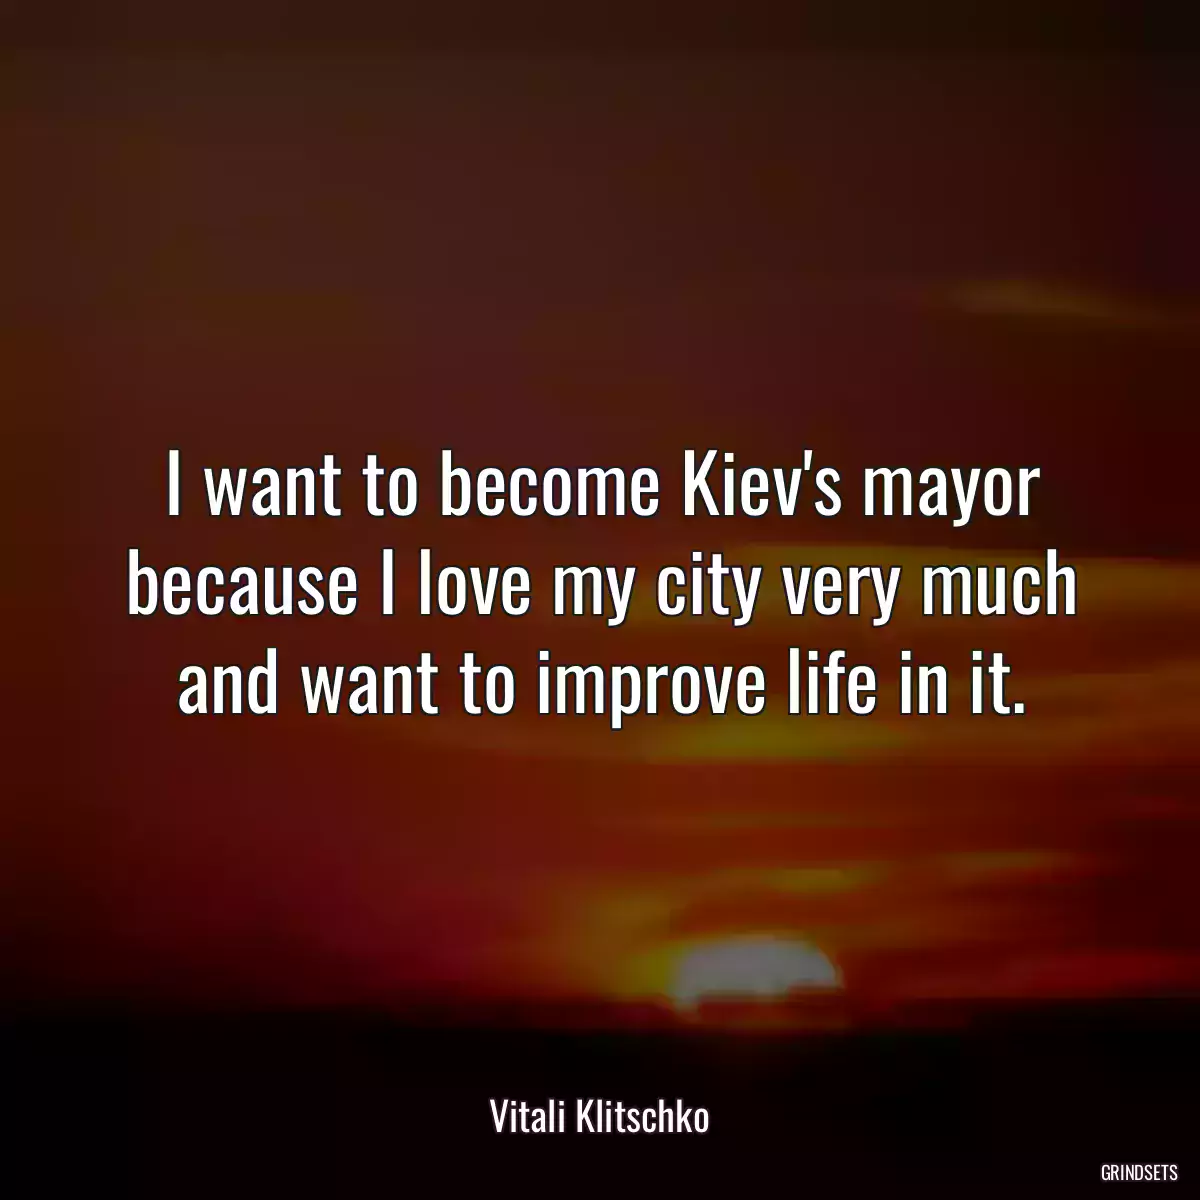 I want to become Kiev\'s mayor because I love my city very much and want to improve life in it.